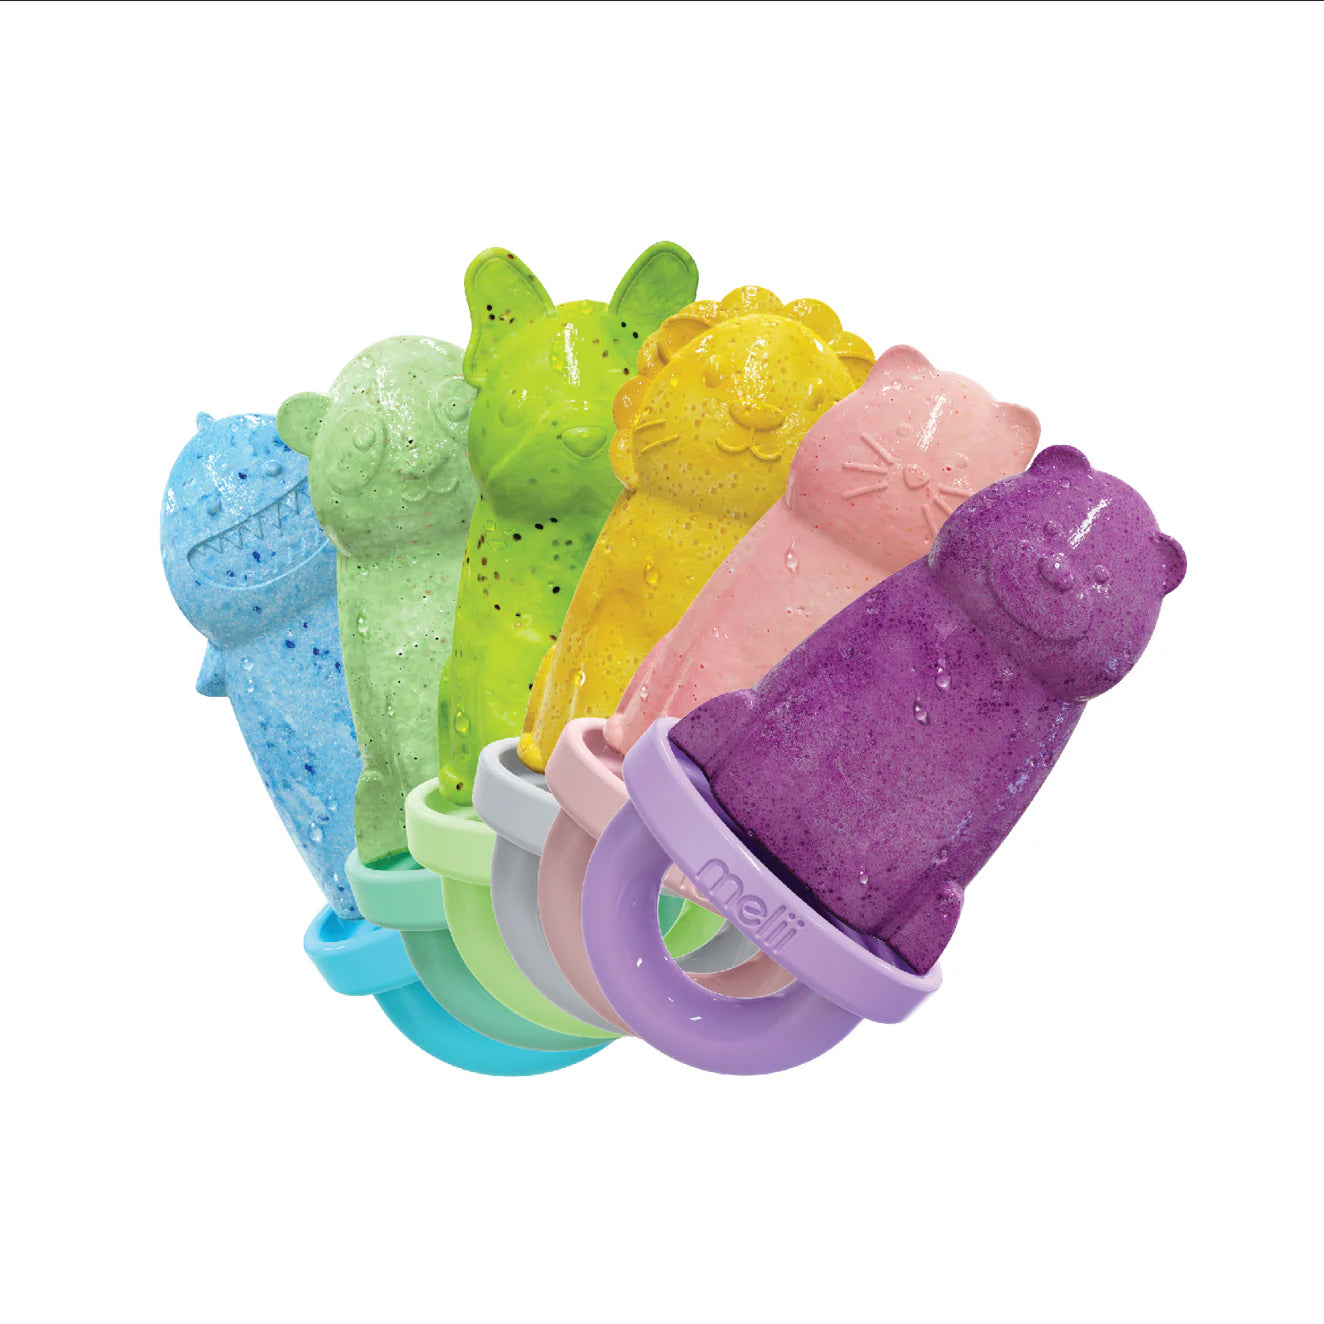 melii-animal-ice-pops-with-tray-6-piece